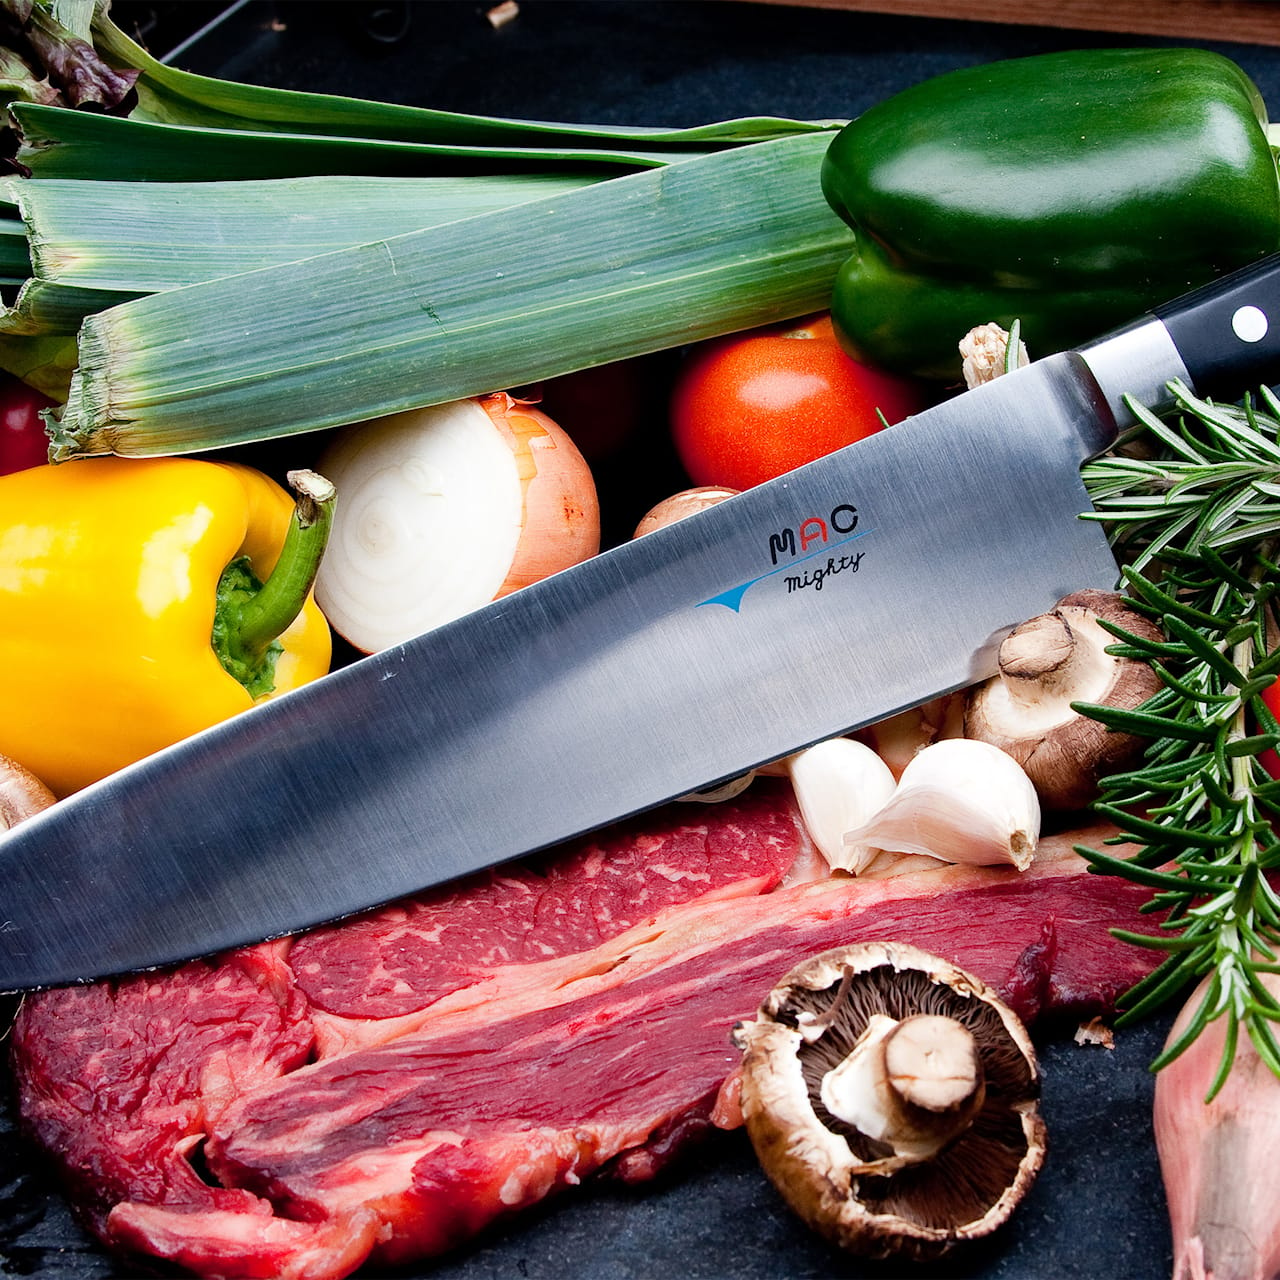 Mighty - Chef's knife, 22 cm